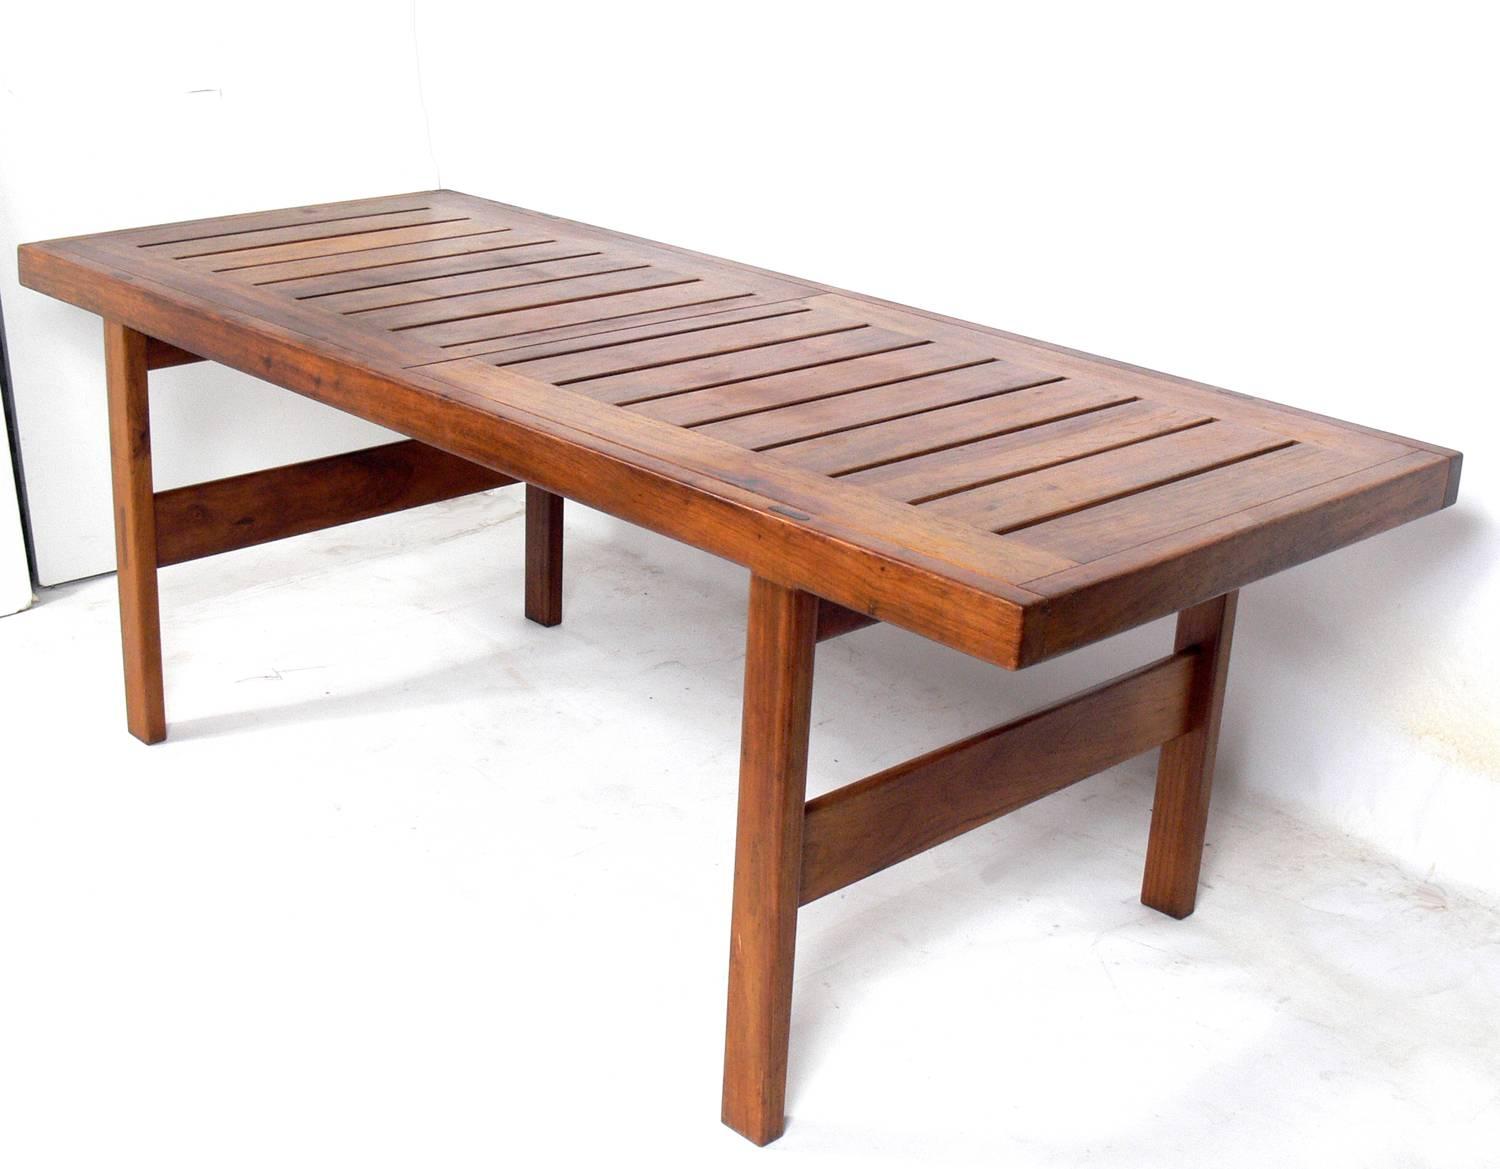 Clean lined midcentury dining table, designed by John Tabraham for Kallenbach, South African, circa 1960s. Retains wonderful original patina. Clearly inspired by Danish modern design, but with clean lines and little ornamentation, save for the